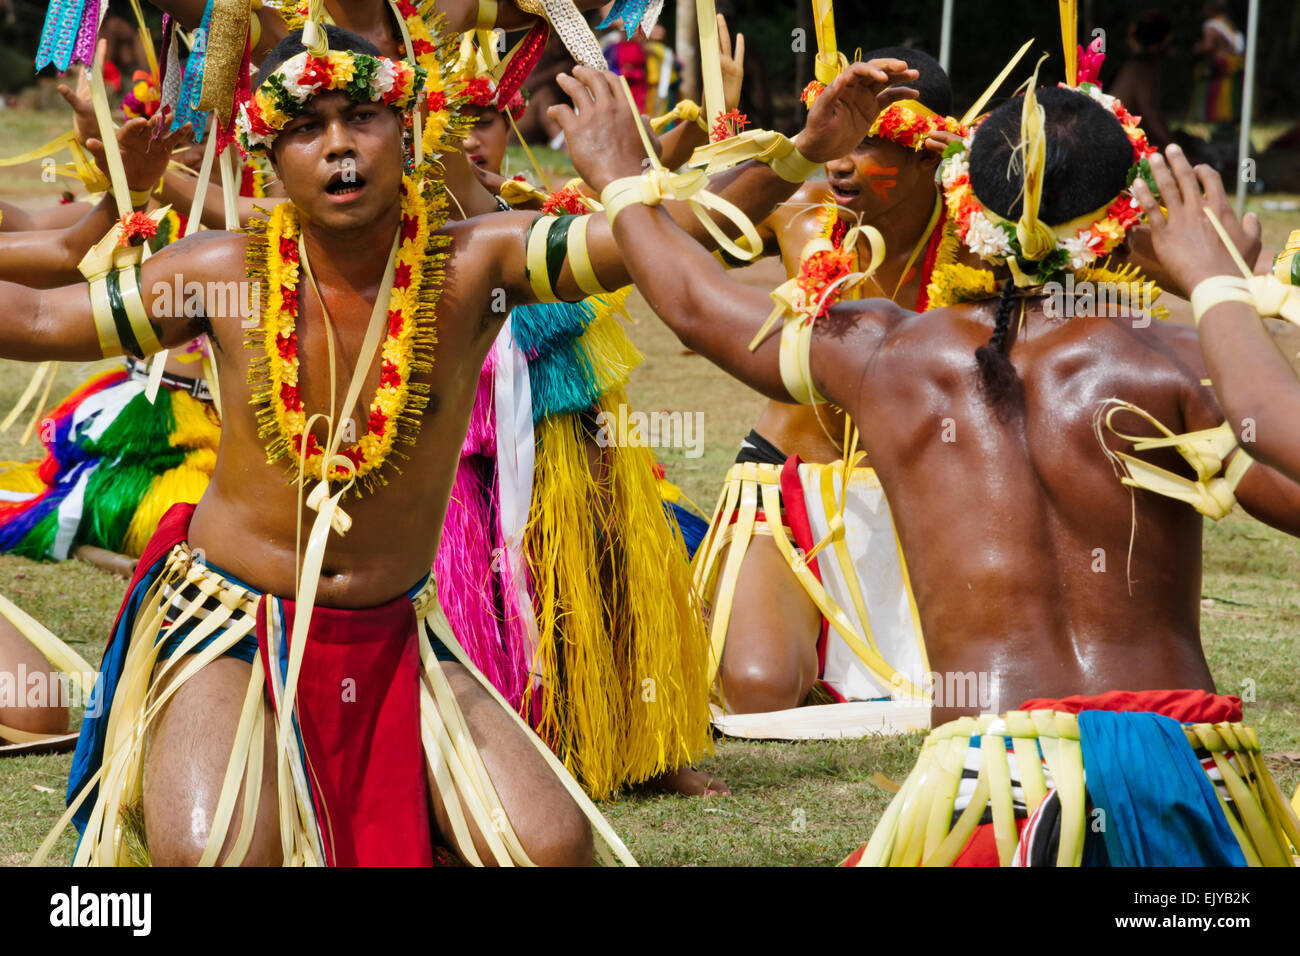 Yapese men in traditional clothing dancing at Yap Day Festival, Yap Island, Federated States of Micronesia Stock Photo